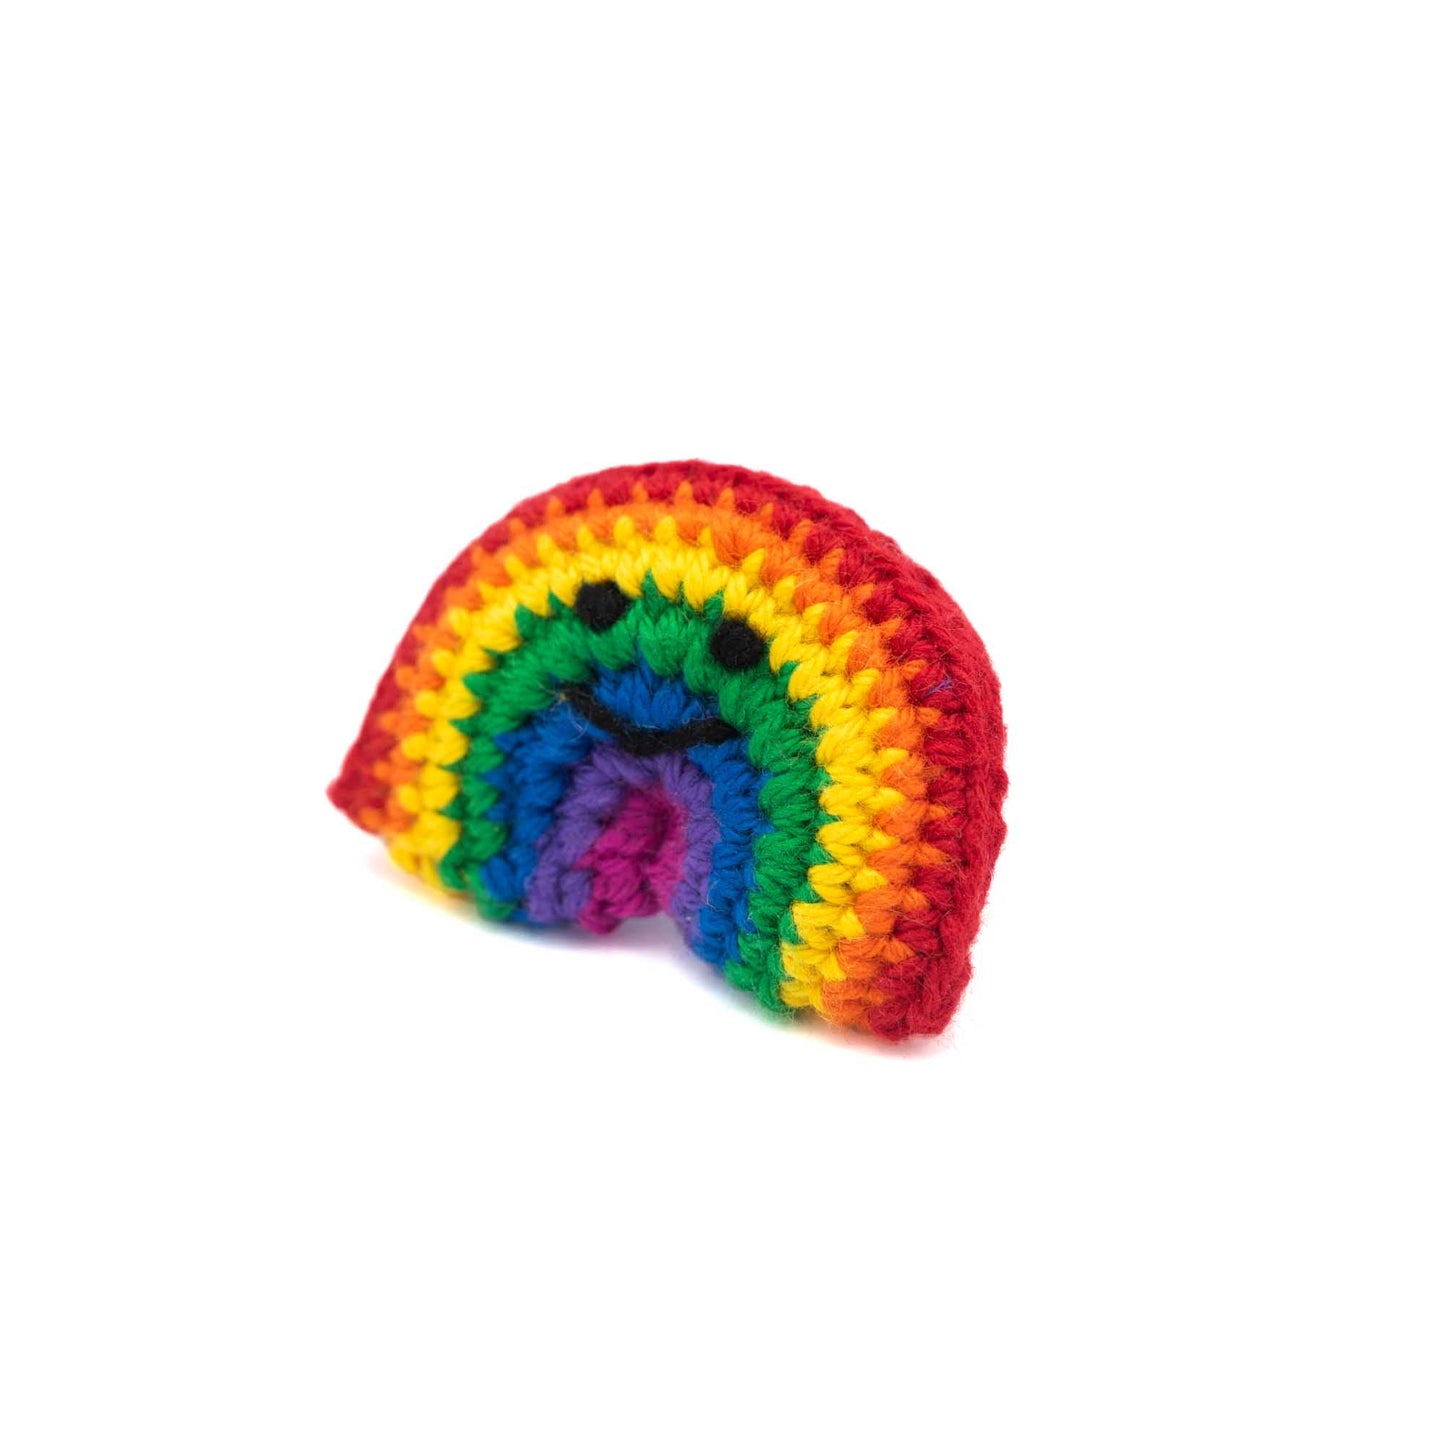 Angled view of Crochet rainbow brooch with a little smiley face in black thread.